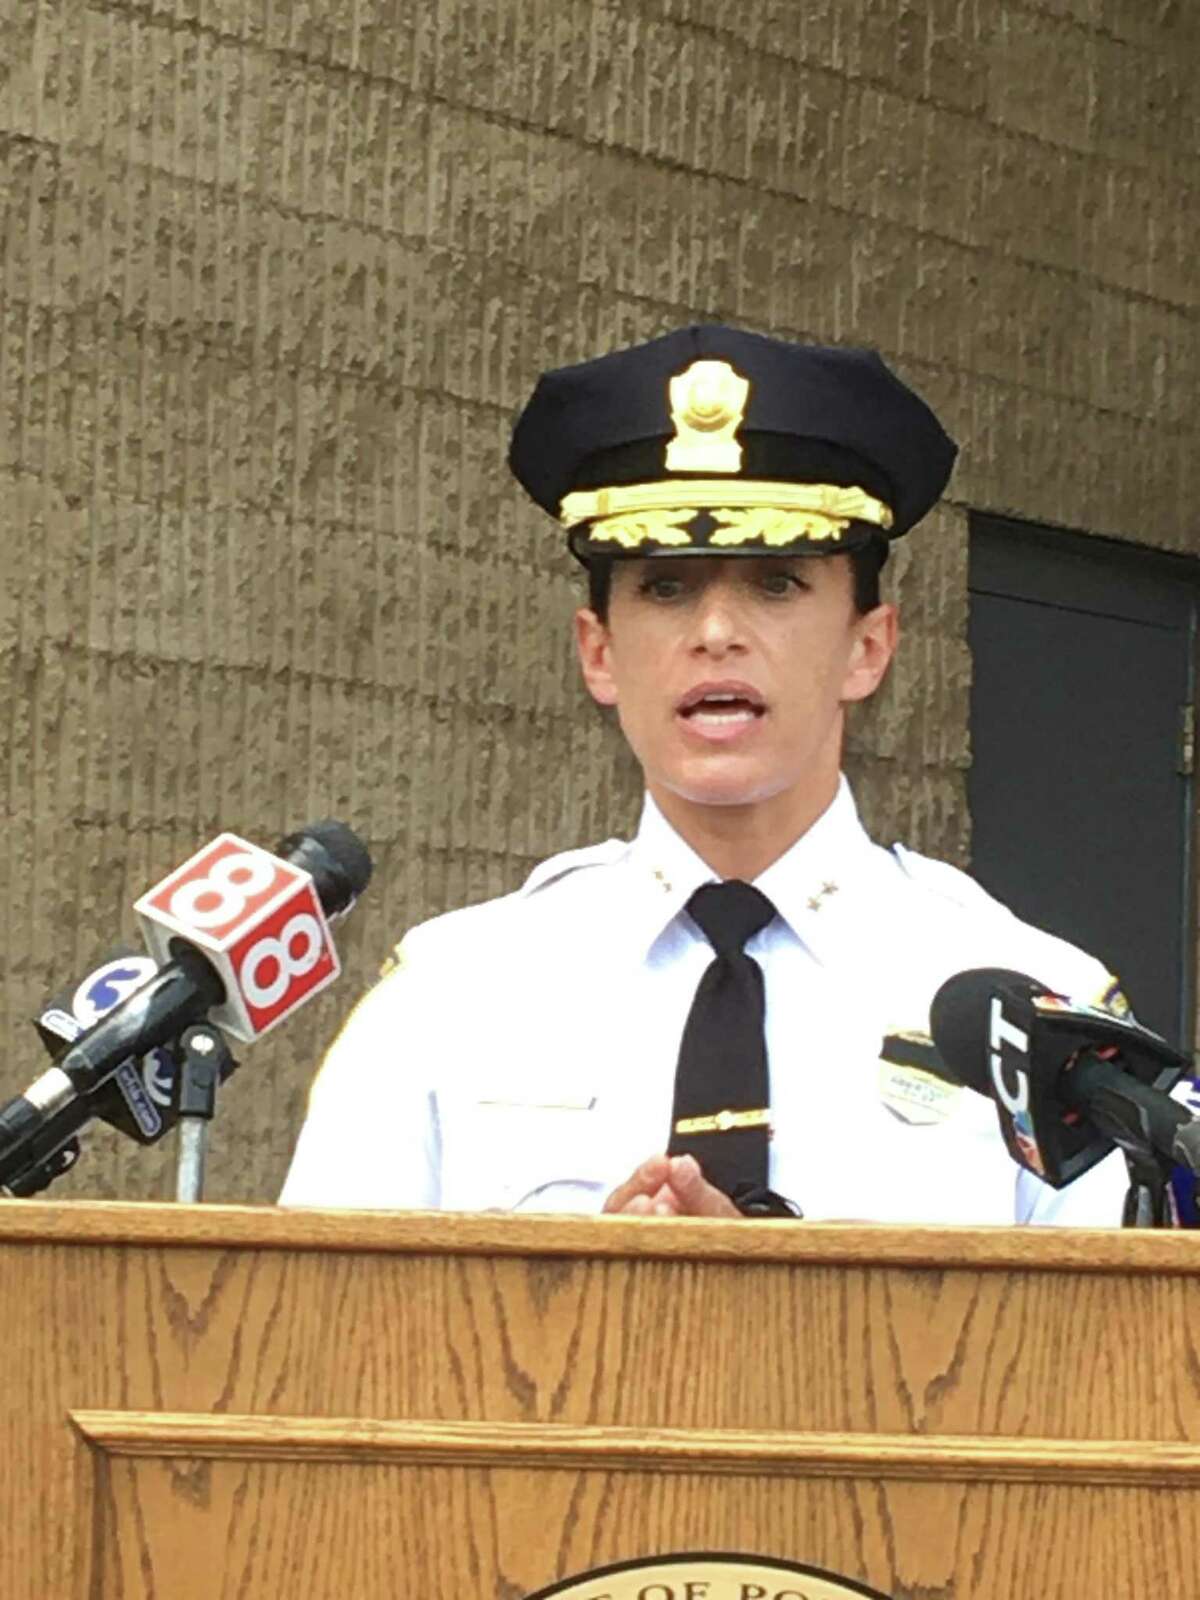 New Haven acting Chief of Police Renee Dominguez speaks about the early-morning shooting death of Jack Hopeton, 44, of Waterbury on Tuesday, May 18, 2021. The shooting death was New Haven's 11th homicide of 2021. Dominguez spoke at a press conference on the front steps of Police Headquarters, 1 Union Ave., joined by Mayor Justin Elicker and Assistant Chief Karl Jacobson.